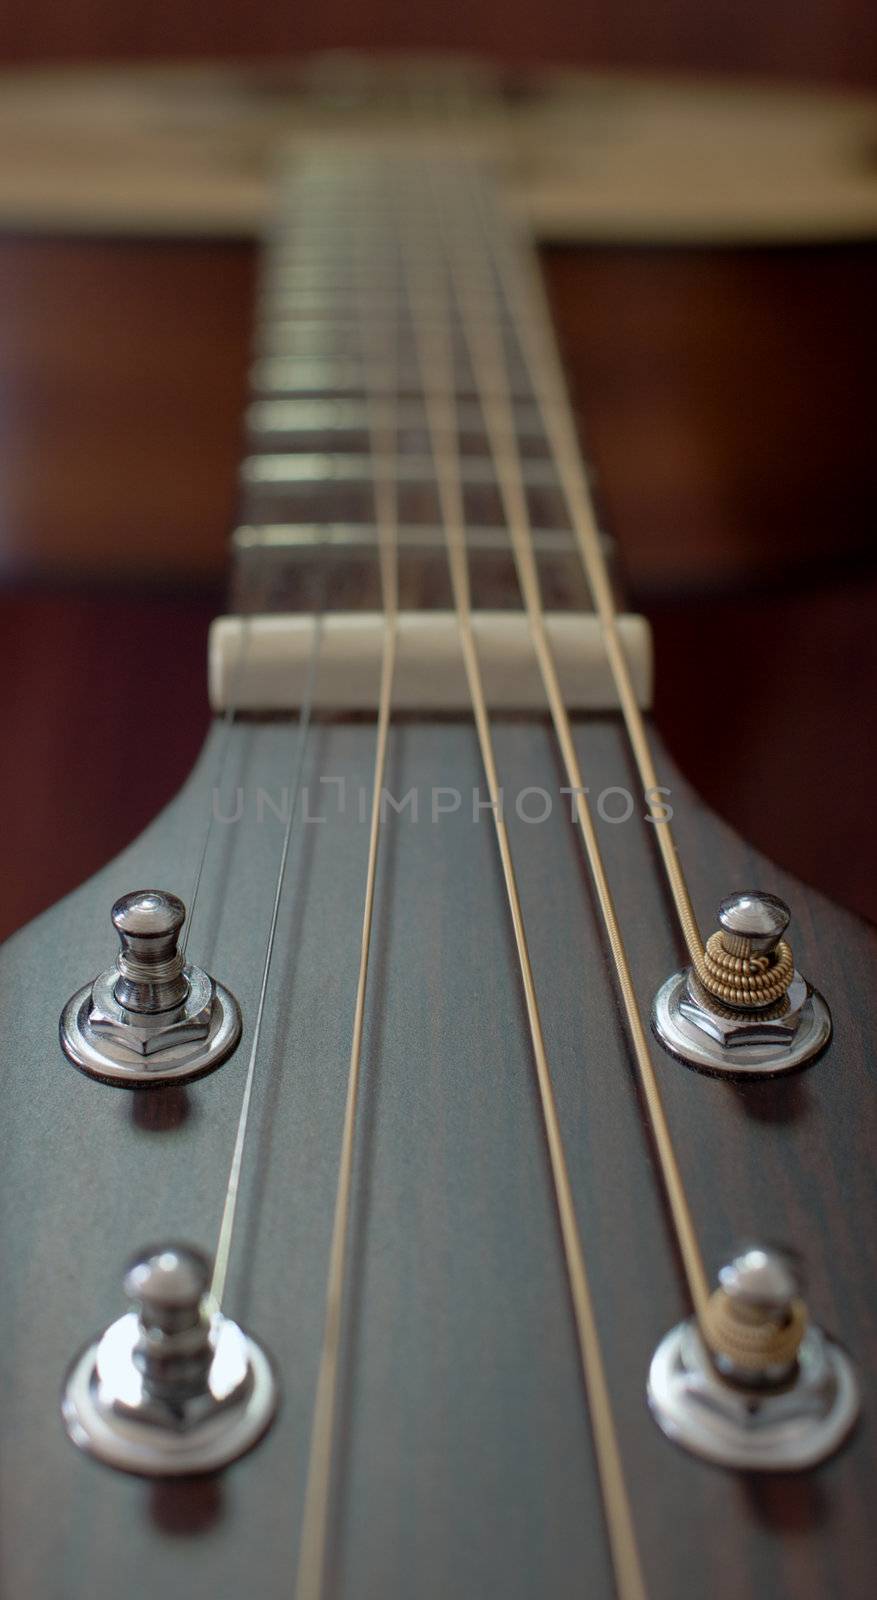 Guitar neck and strings soft focus by bobkeenan